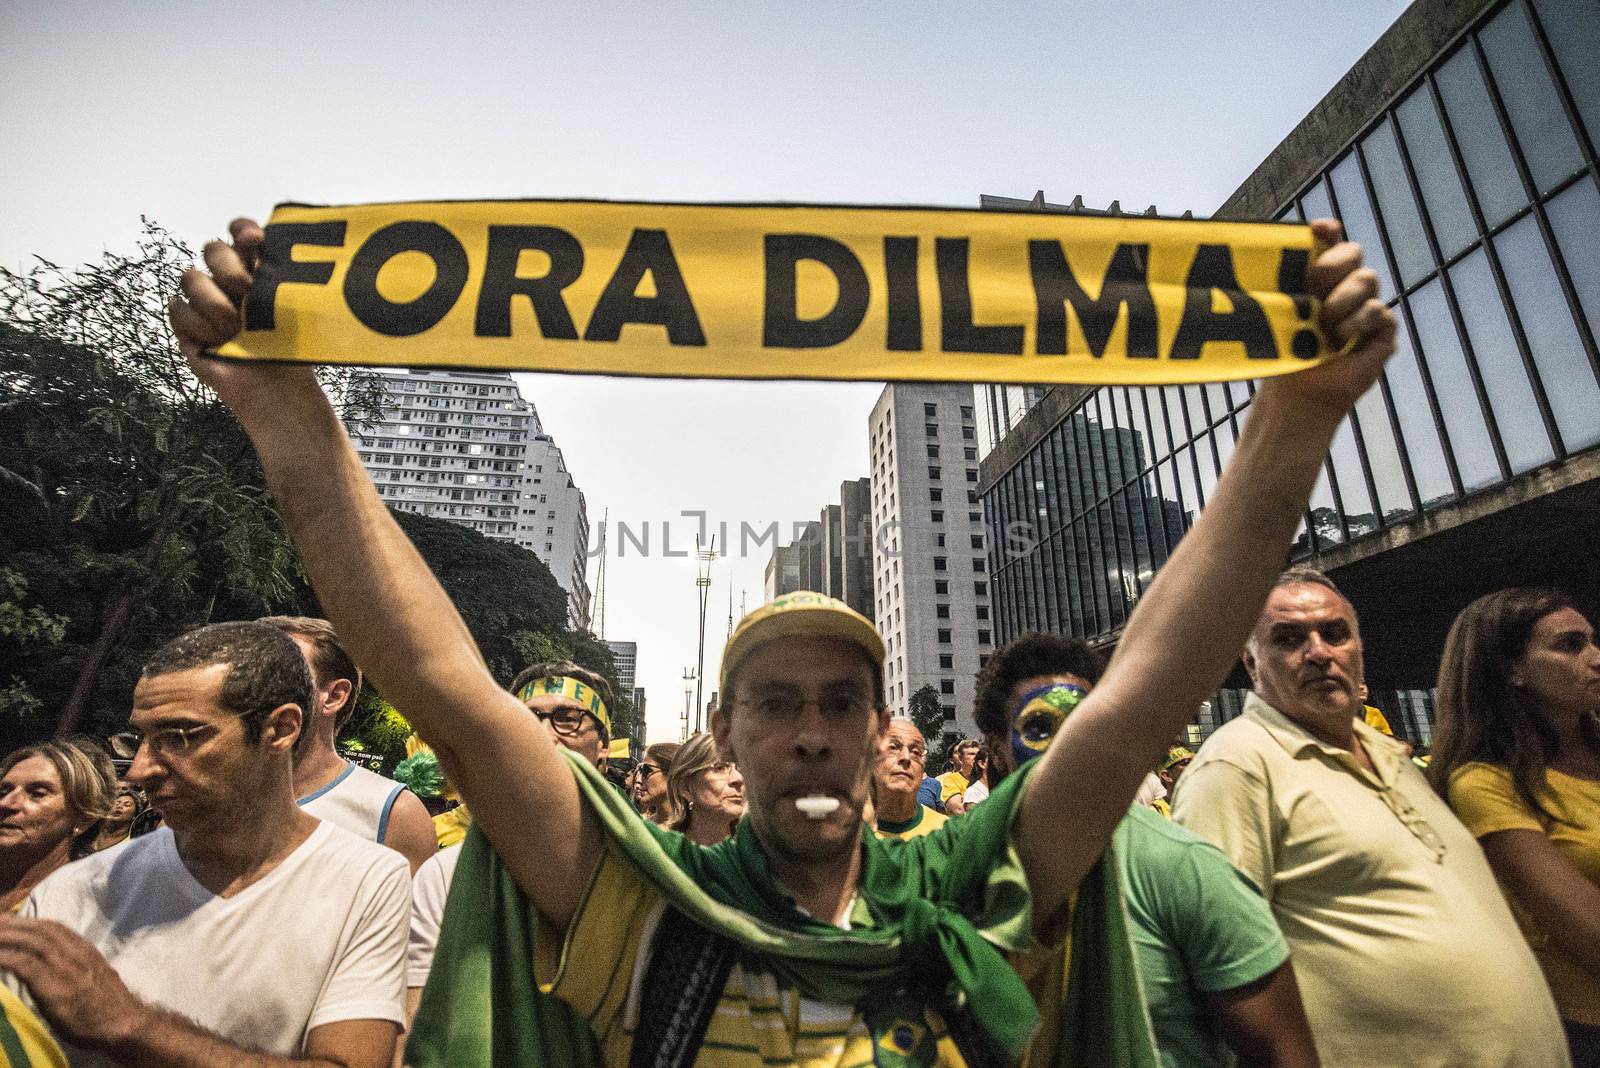 BRAZIl, Sao Paulo: A man holds a placard which reads Dilma out! as thousands of activists supporting the impeachment of President Dilma Rousseff take part in a protest in Sao Paulo, on April 17, 2016. Brazilian lawmakers on Sunday reached the two thirds majority necessary to authorize impeachment proceedings against President Dilma Rousseff. The lower house vote sends Rousseff's case to the Senate, which can vote to open a trial. A two thirds majority in the upper house would eject her from office. Rousseff, whose approval rating has plunged to a dismal 10 percent, faces charges of embellishing public accounts to mask the budget deficit during her 2014 reelection.